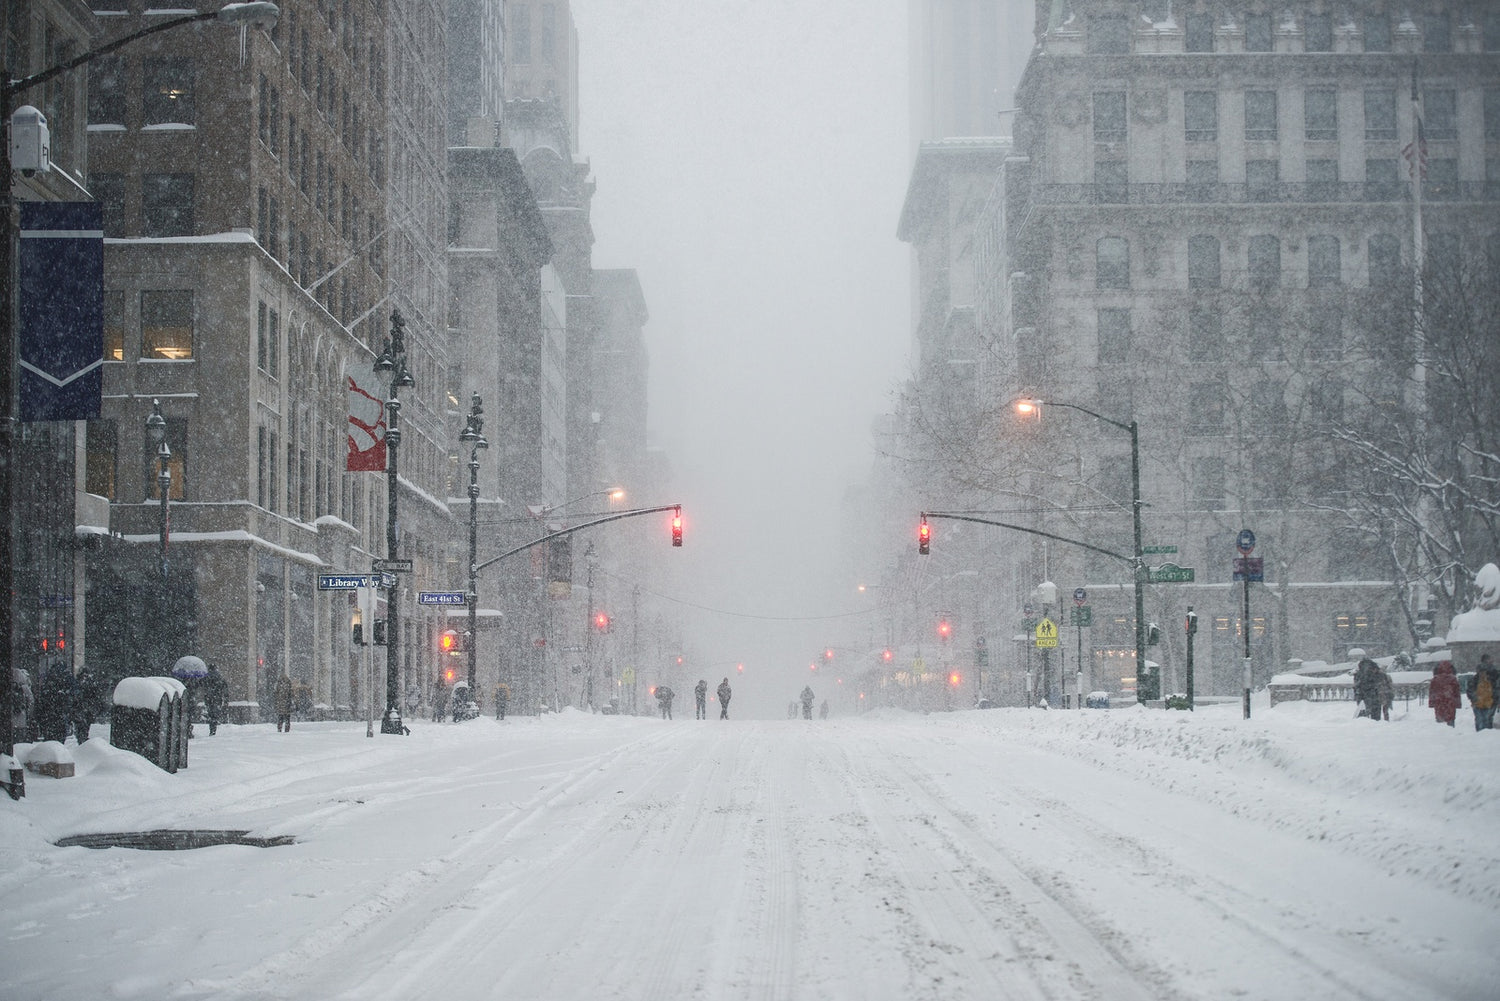 How to Ready Employees and Customers for Winter-Related Downtime